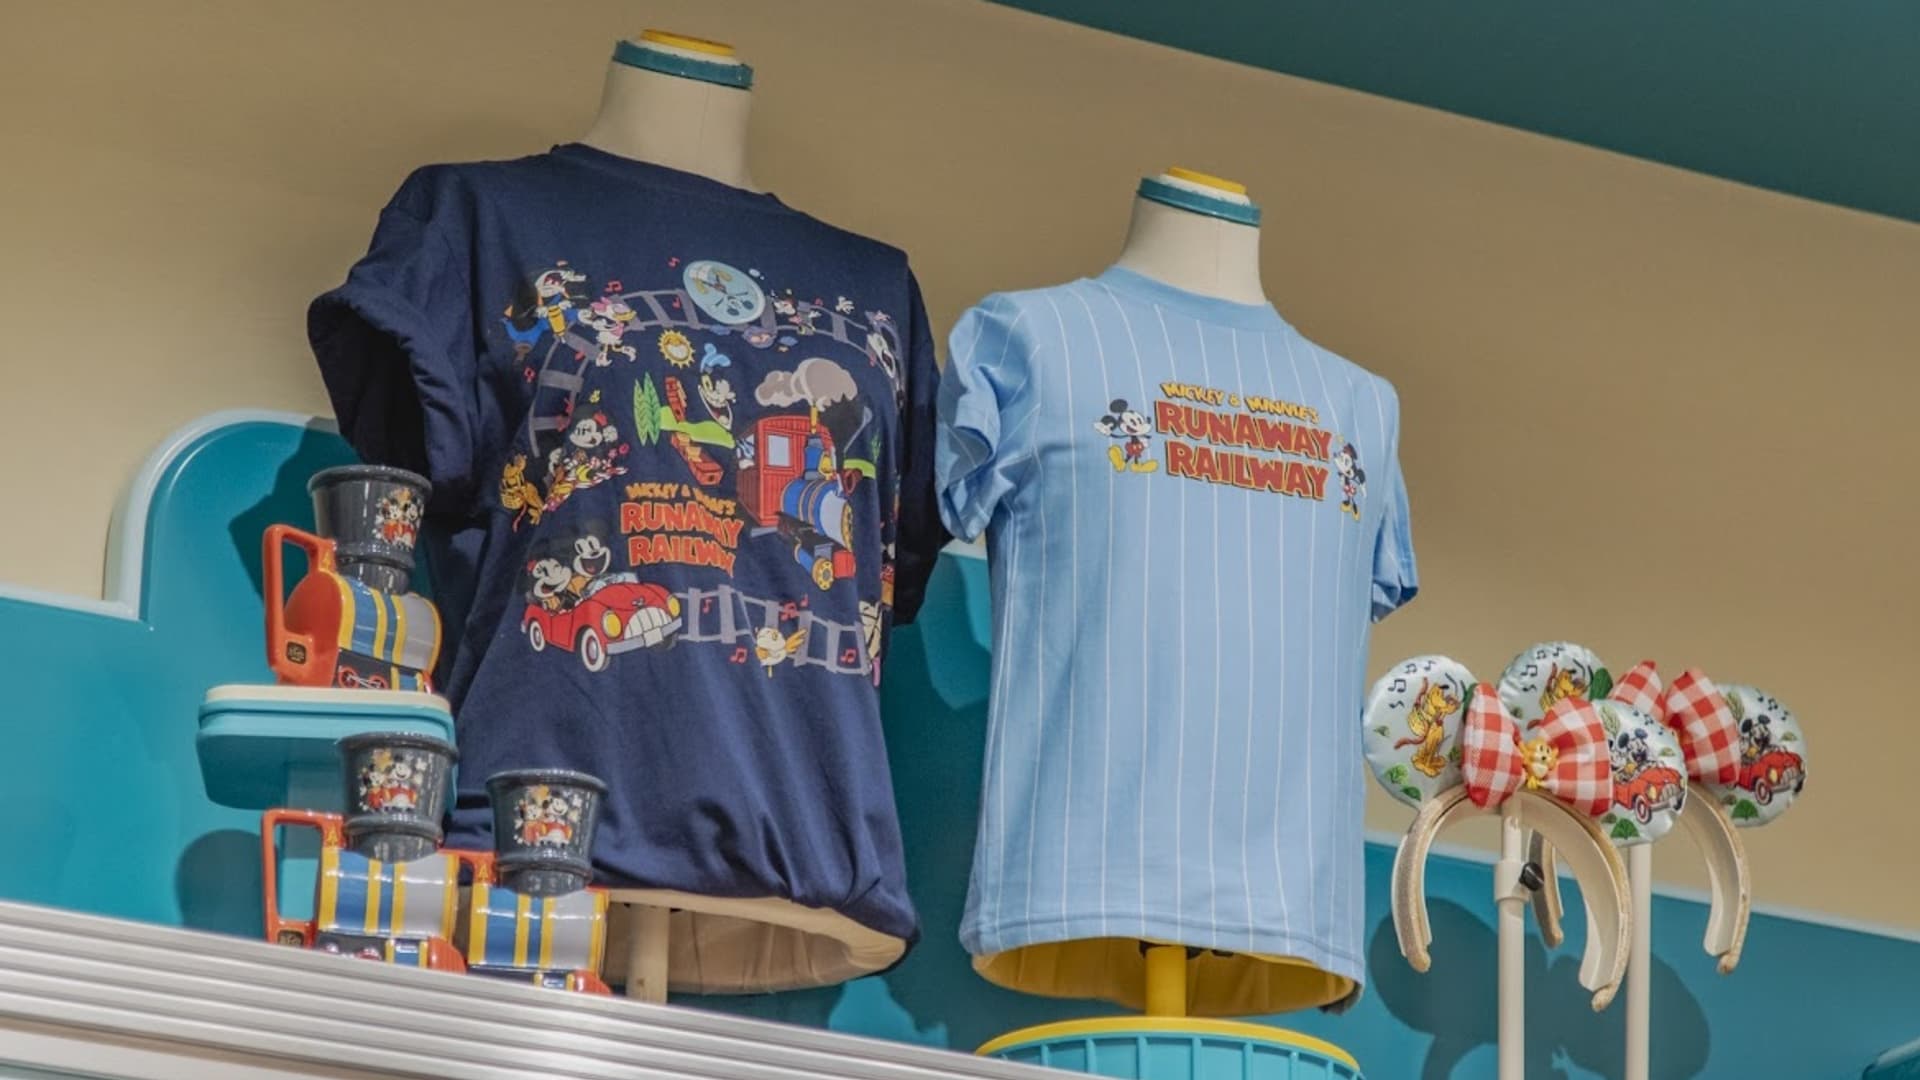 Merchandise from Mickey's Toontown at Disneyland.